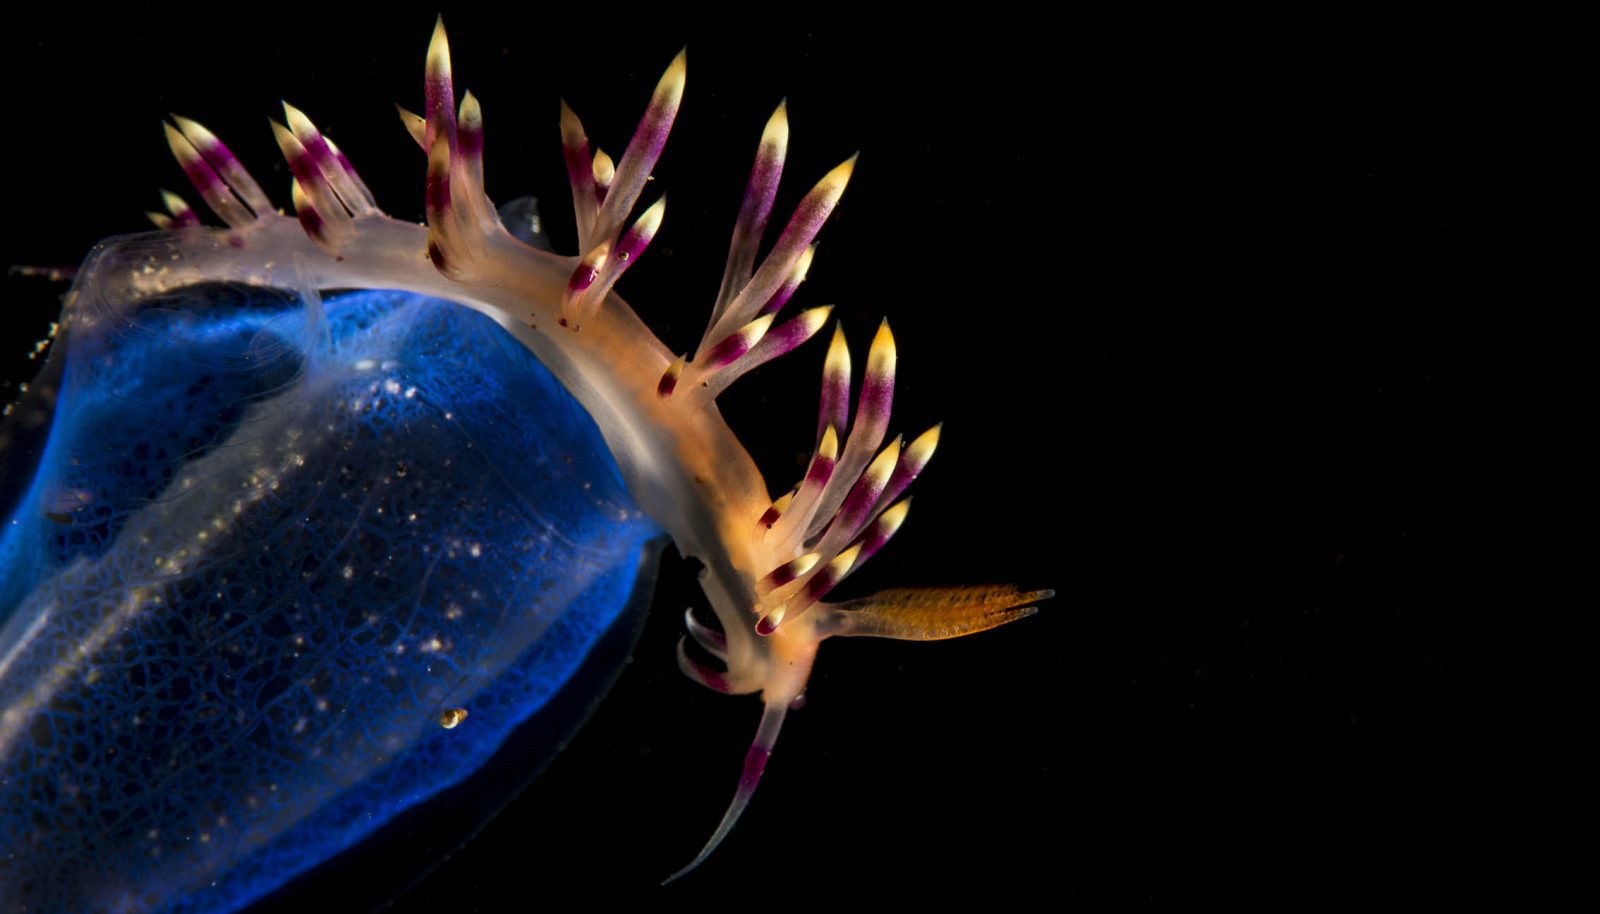 Lembeh Gulen Critter Shootout 2016, Nudibranch Results Revealed!